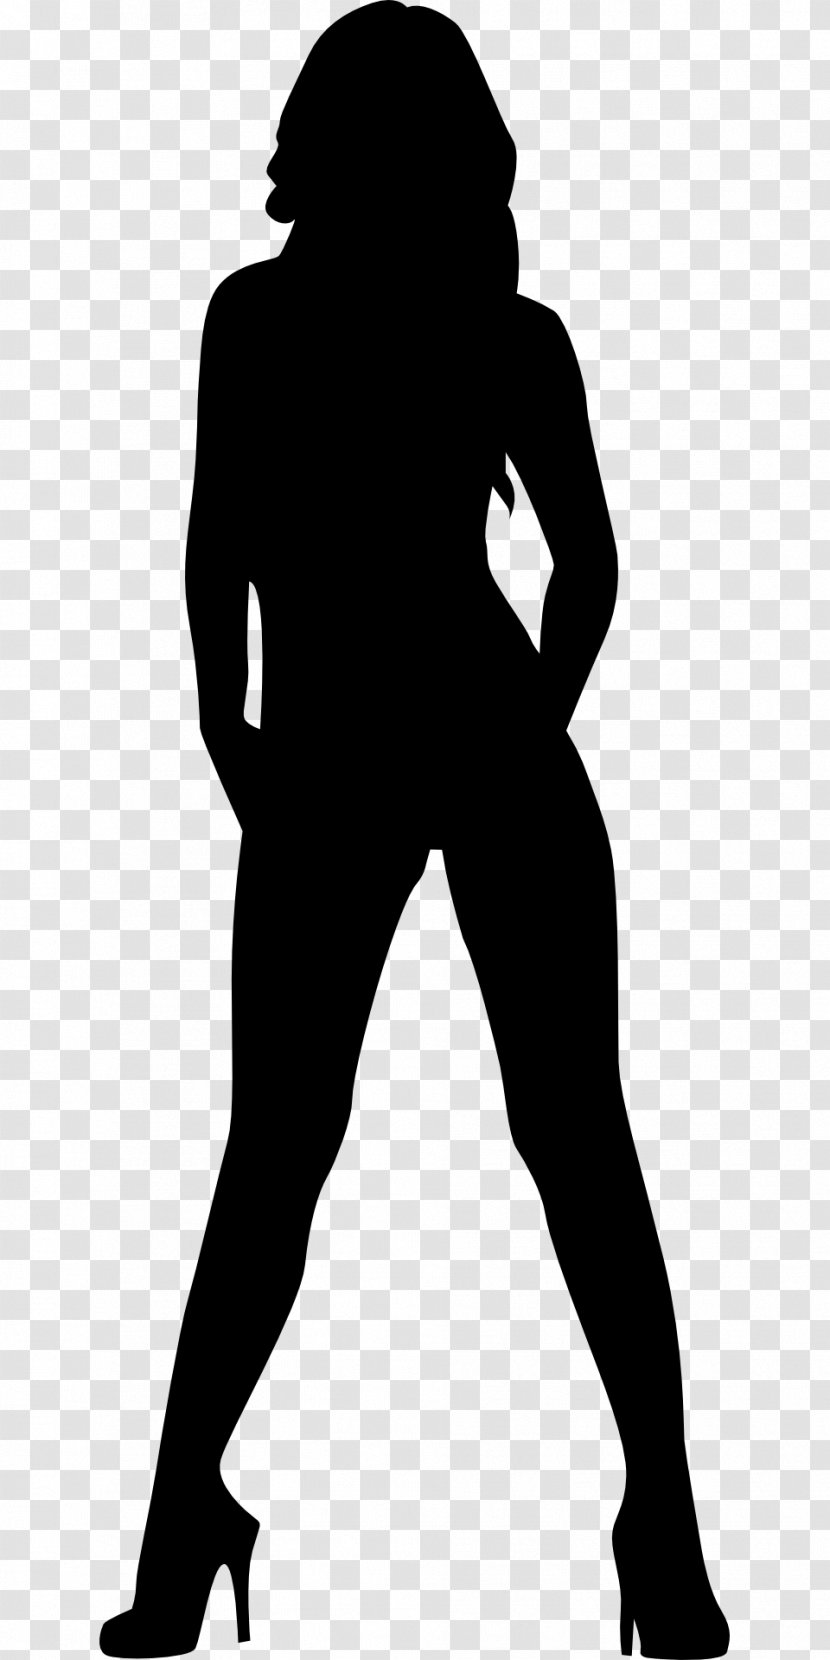 Clip Art Silhouette Openclipart Free Content Image - Male - Undress Frame Testino Undressed Transparent PNG